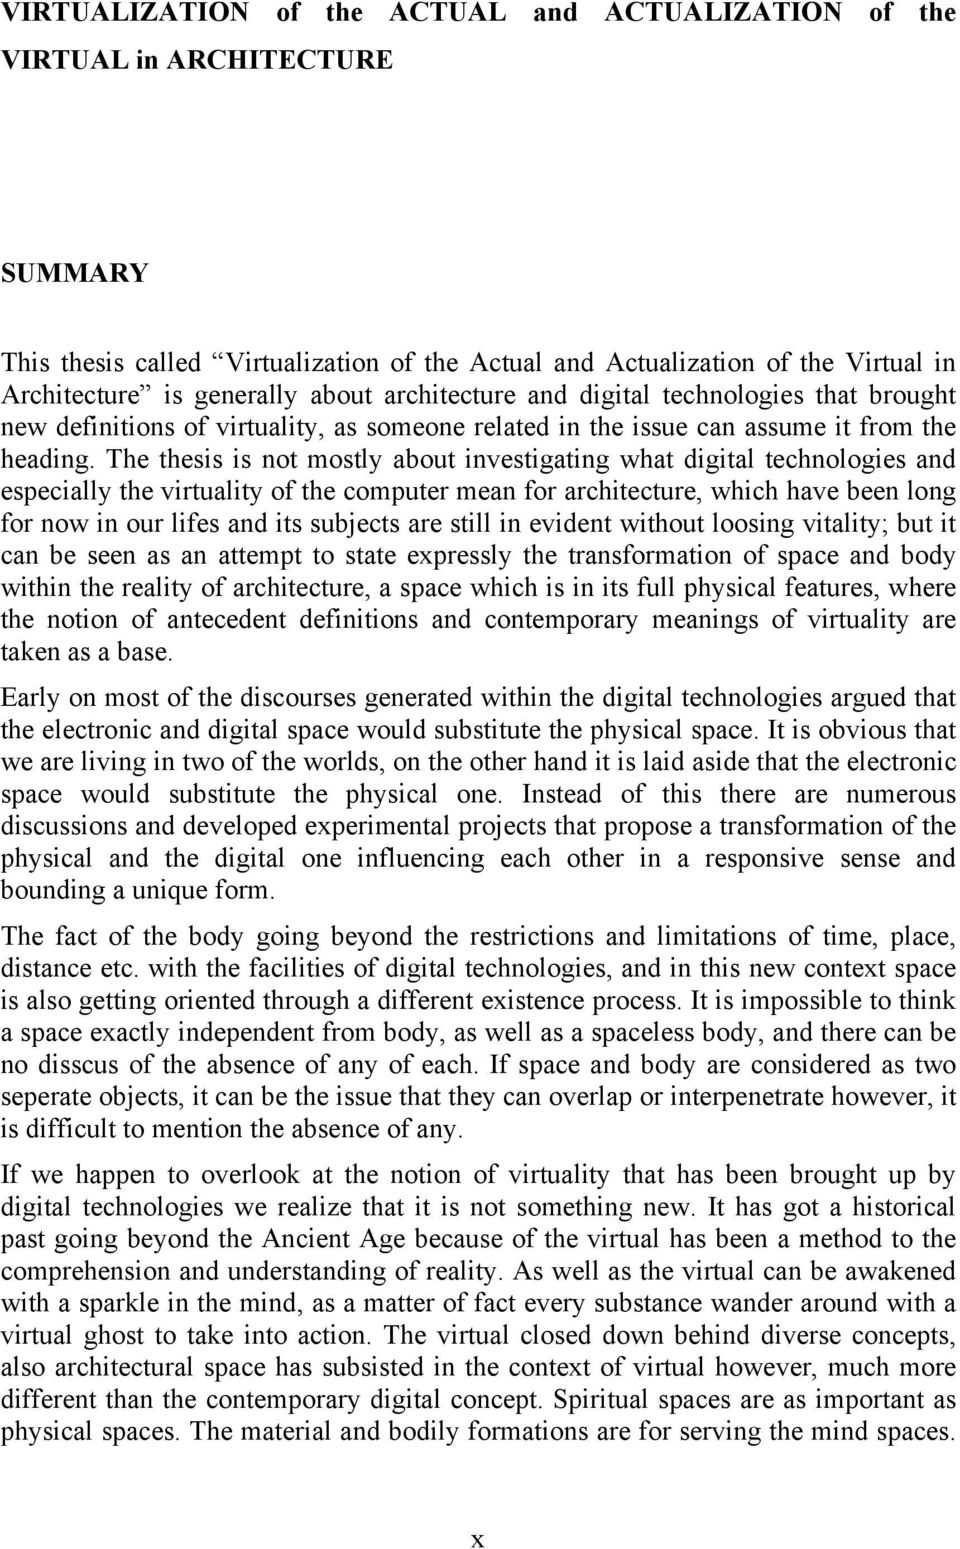 The thesis is not mostly about investigating what digital technologies and especially the virtuality of the computer mean for architecture, which have been long for now in our lifes and its subjects